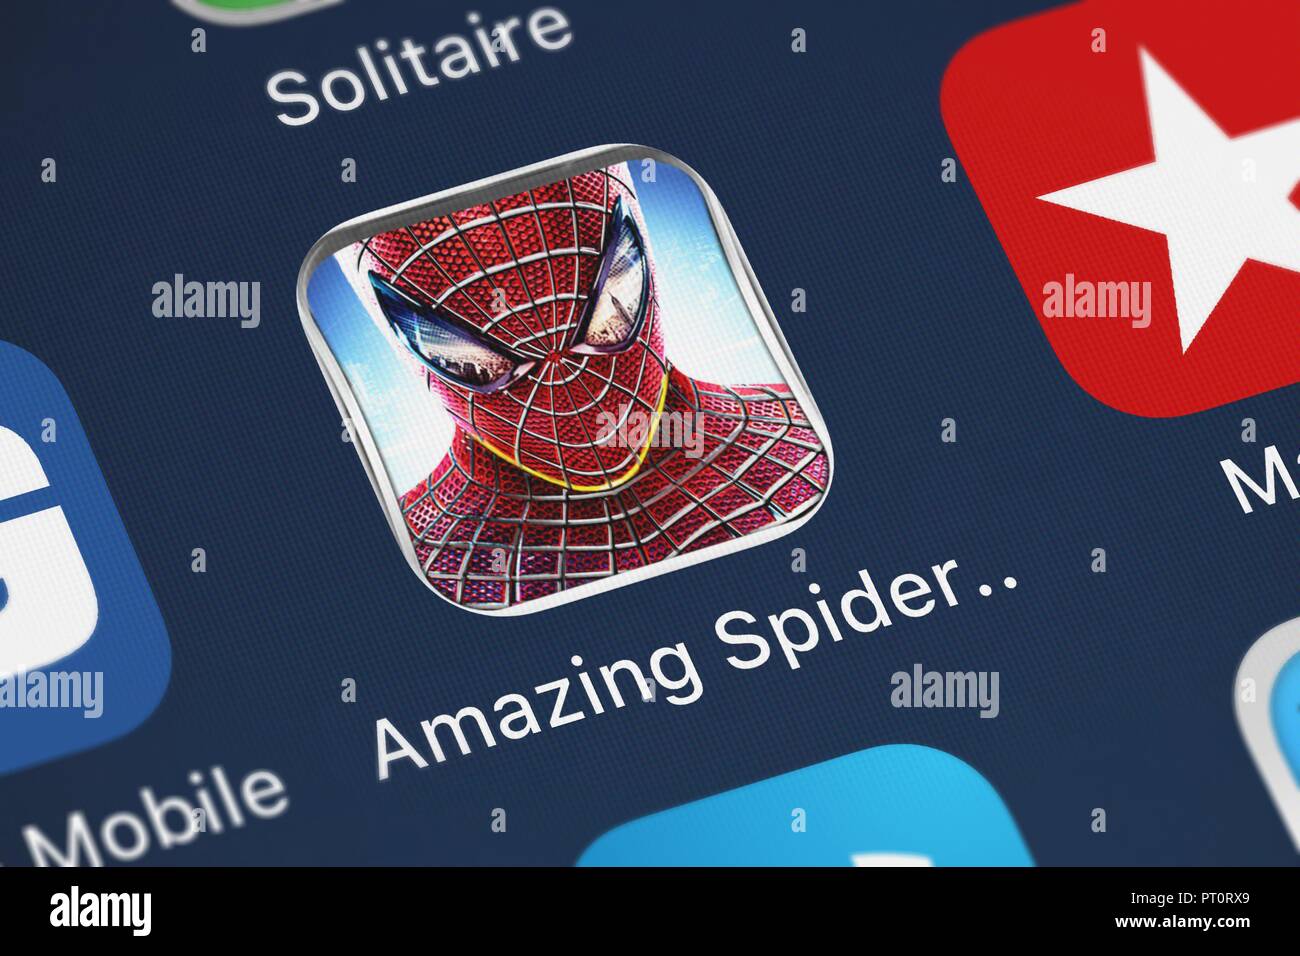 The Amazing Spider-Man Mobile - Full Game - [APK/Android,iOS] 